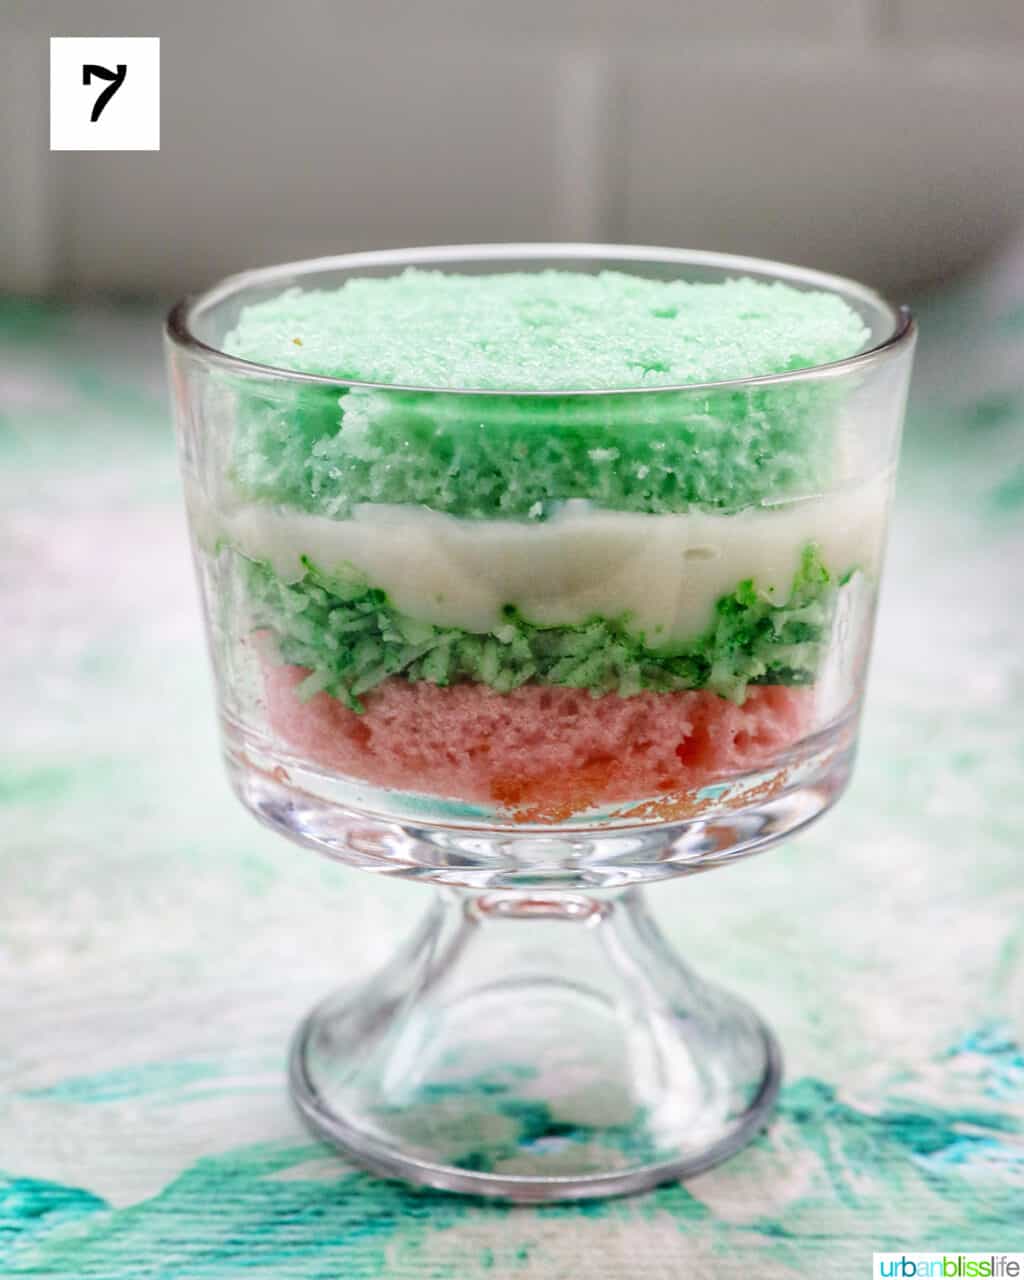 layer of green cake over vanilla pudding over shredded coconut over a layer of pink cake in a trifle bowl.